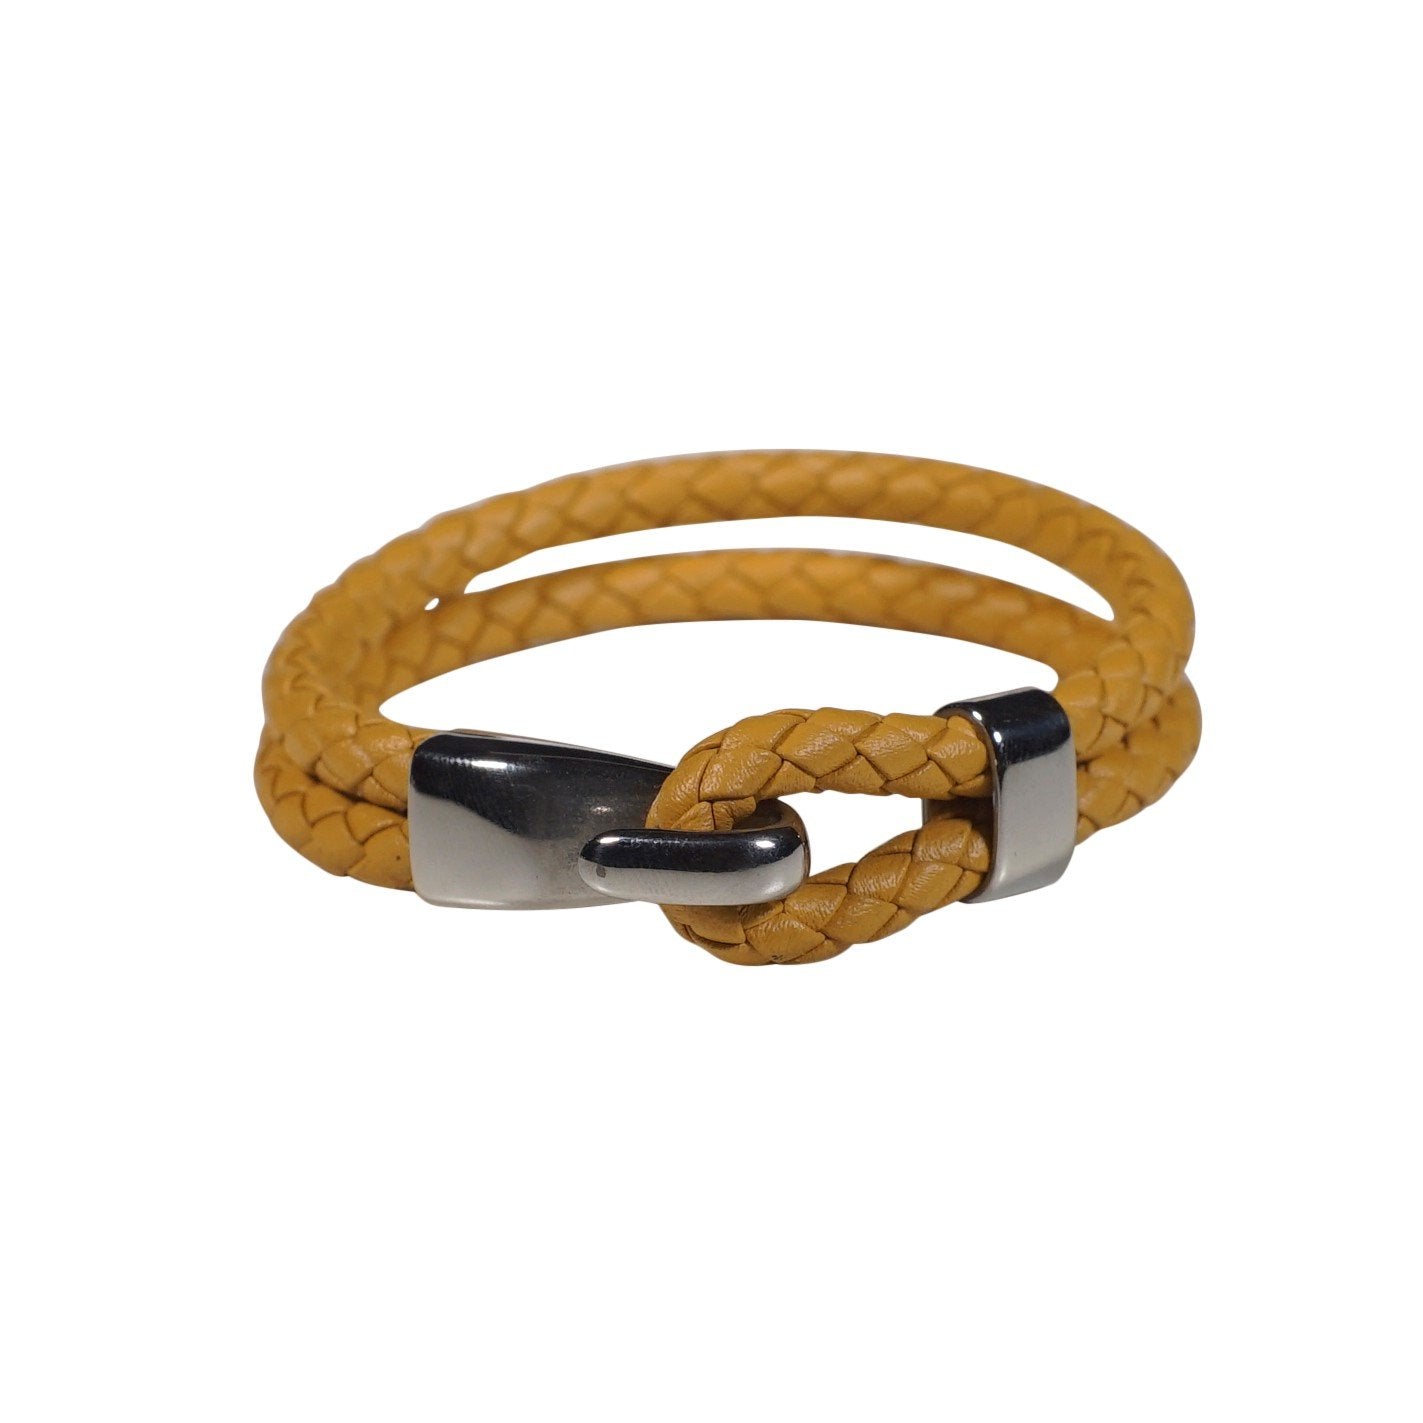 Oxford Leather Bracelet in Yellow (Size M)